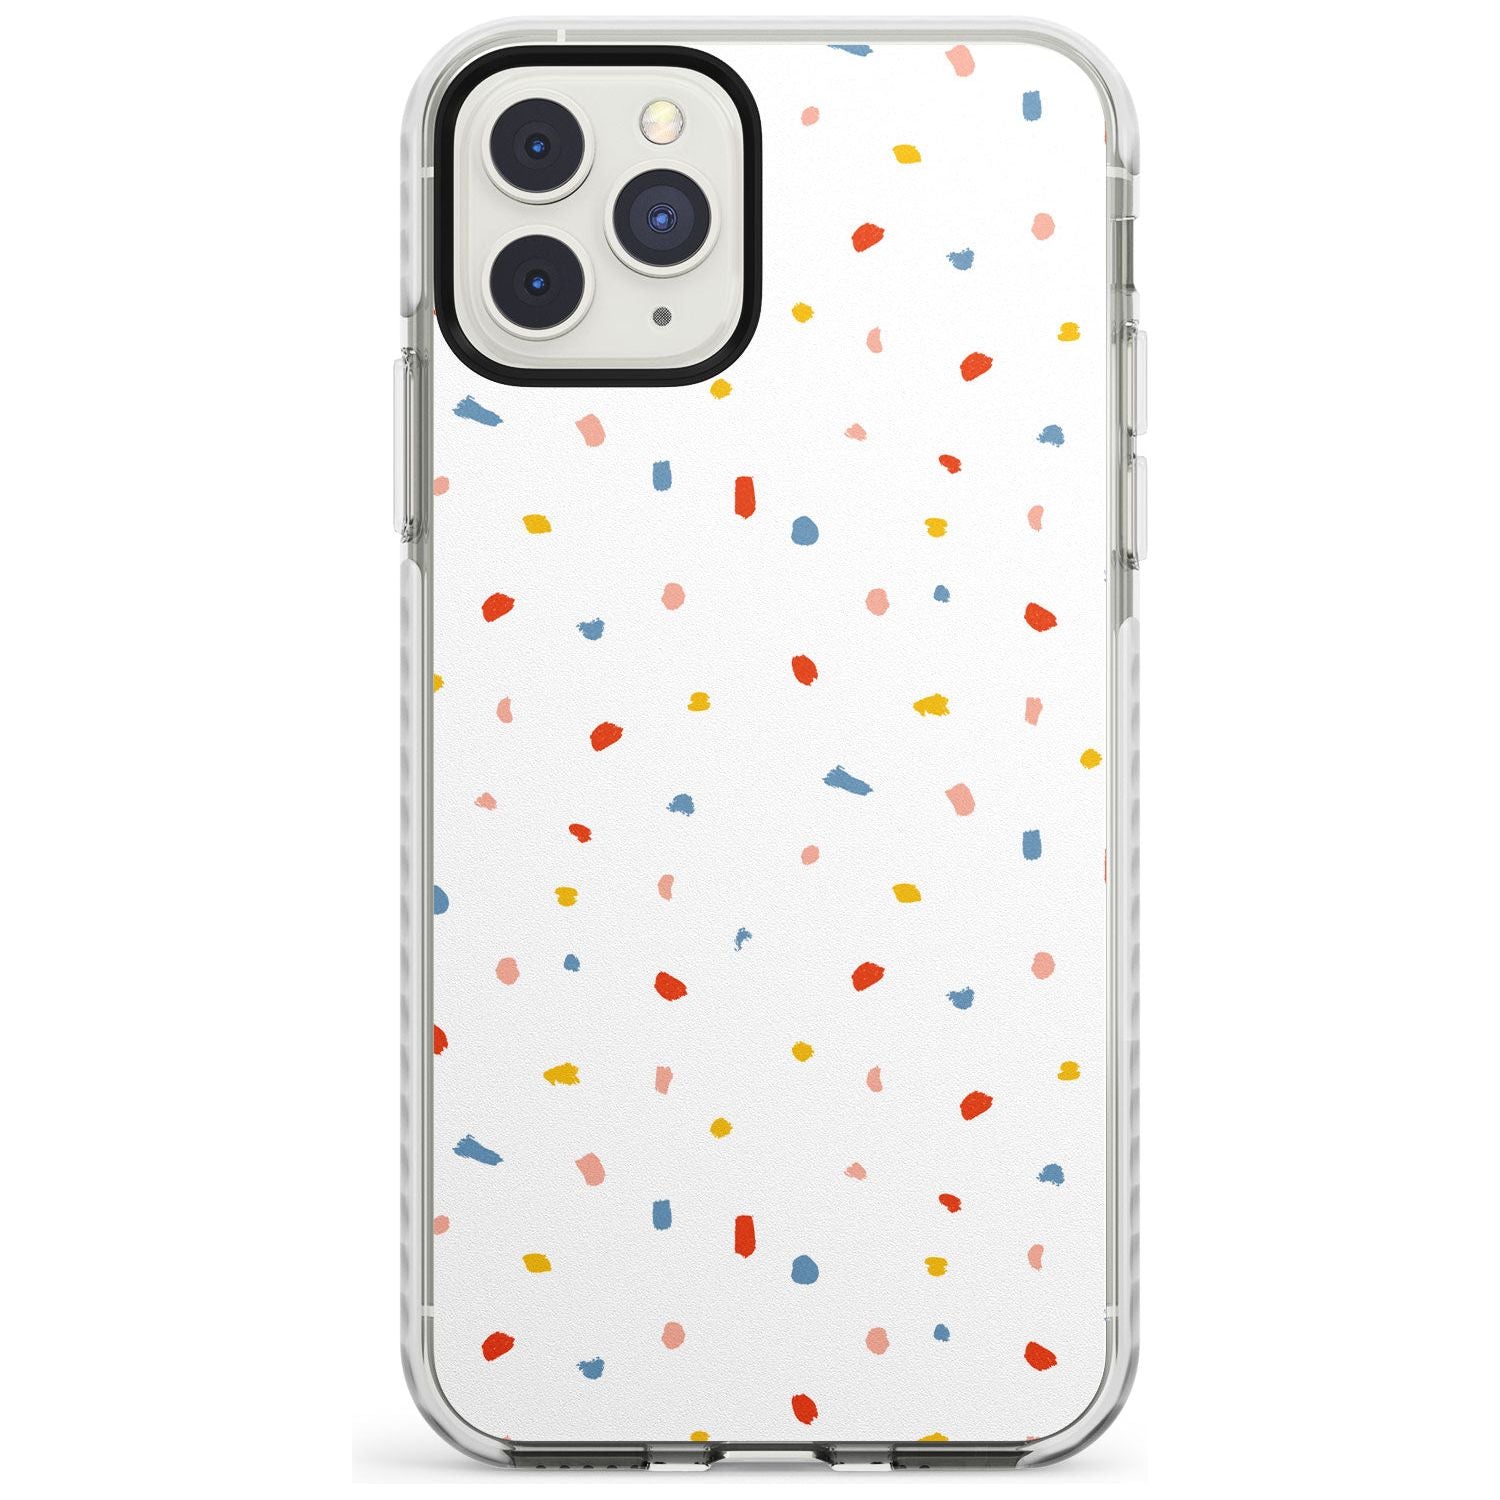 Confetti Print on Solid White Impact Phone Case for iPhone 11 Pro Max